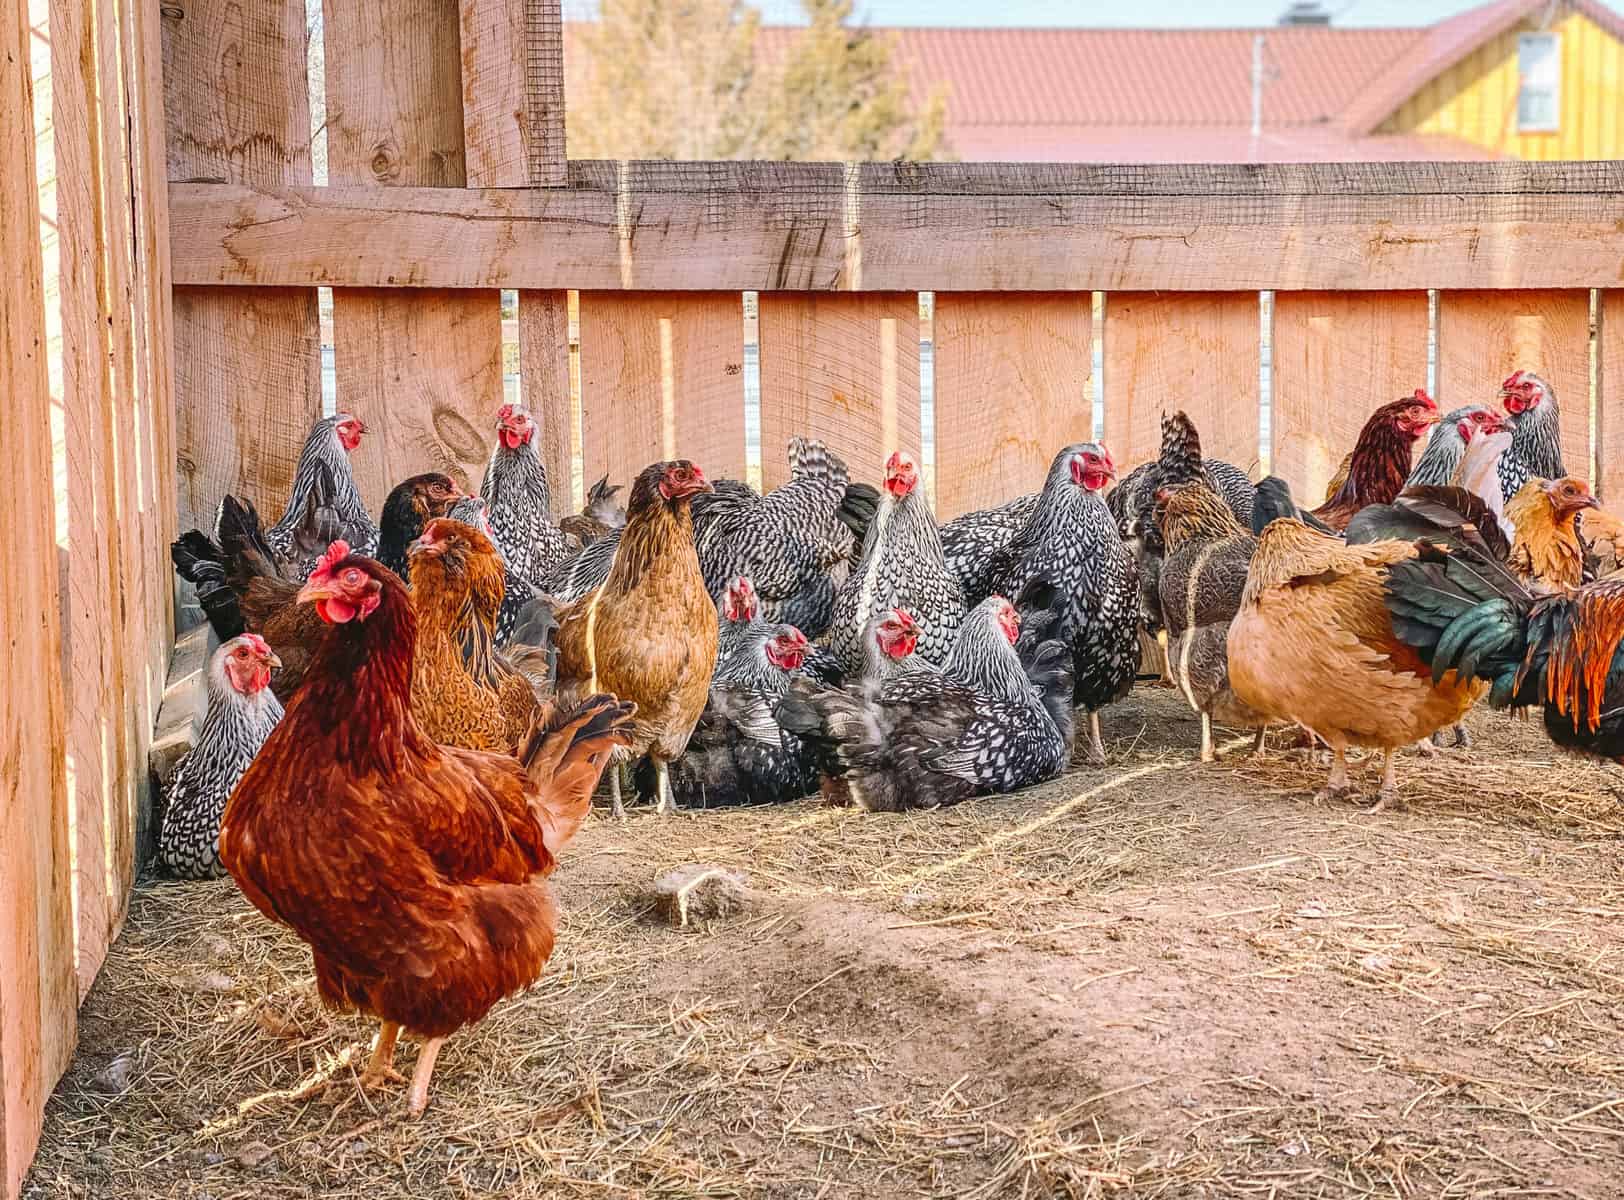 IV. Proper Housing and Environment for Egg-laying Hens